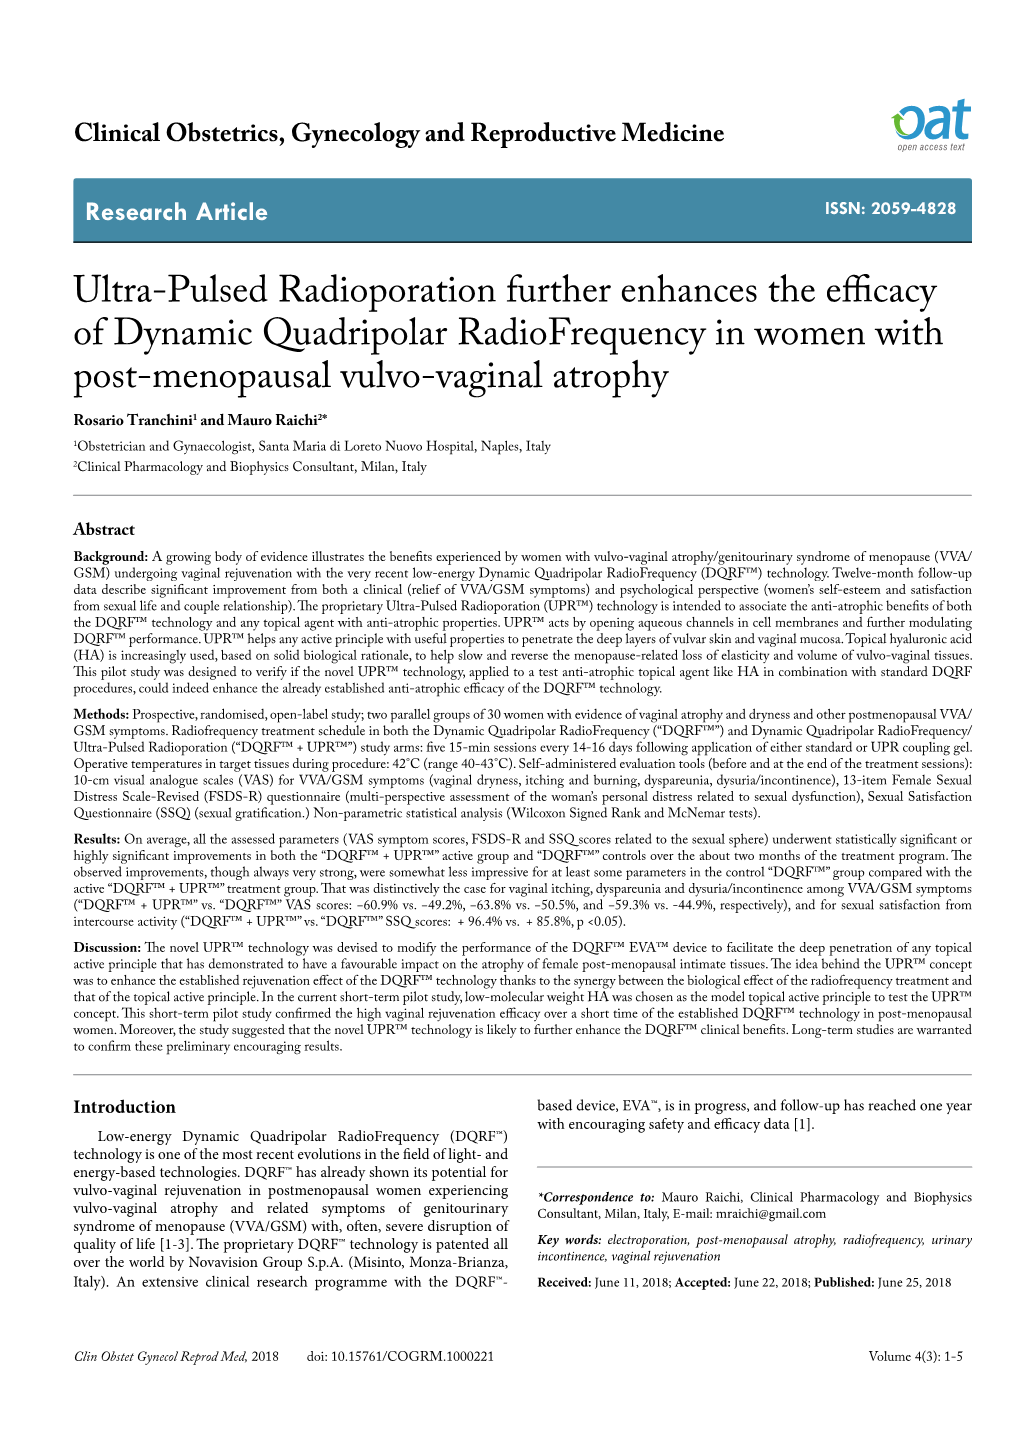 Ultra-Pulsed Radioporation Further Enhances the Efficacy of Dynamic